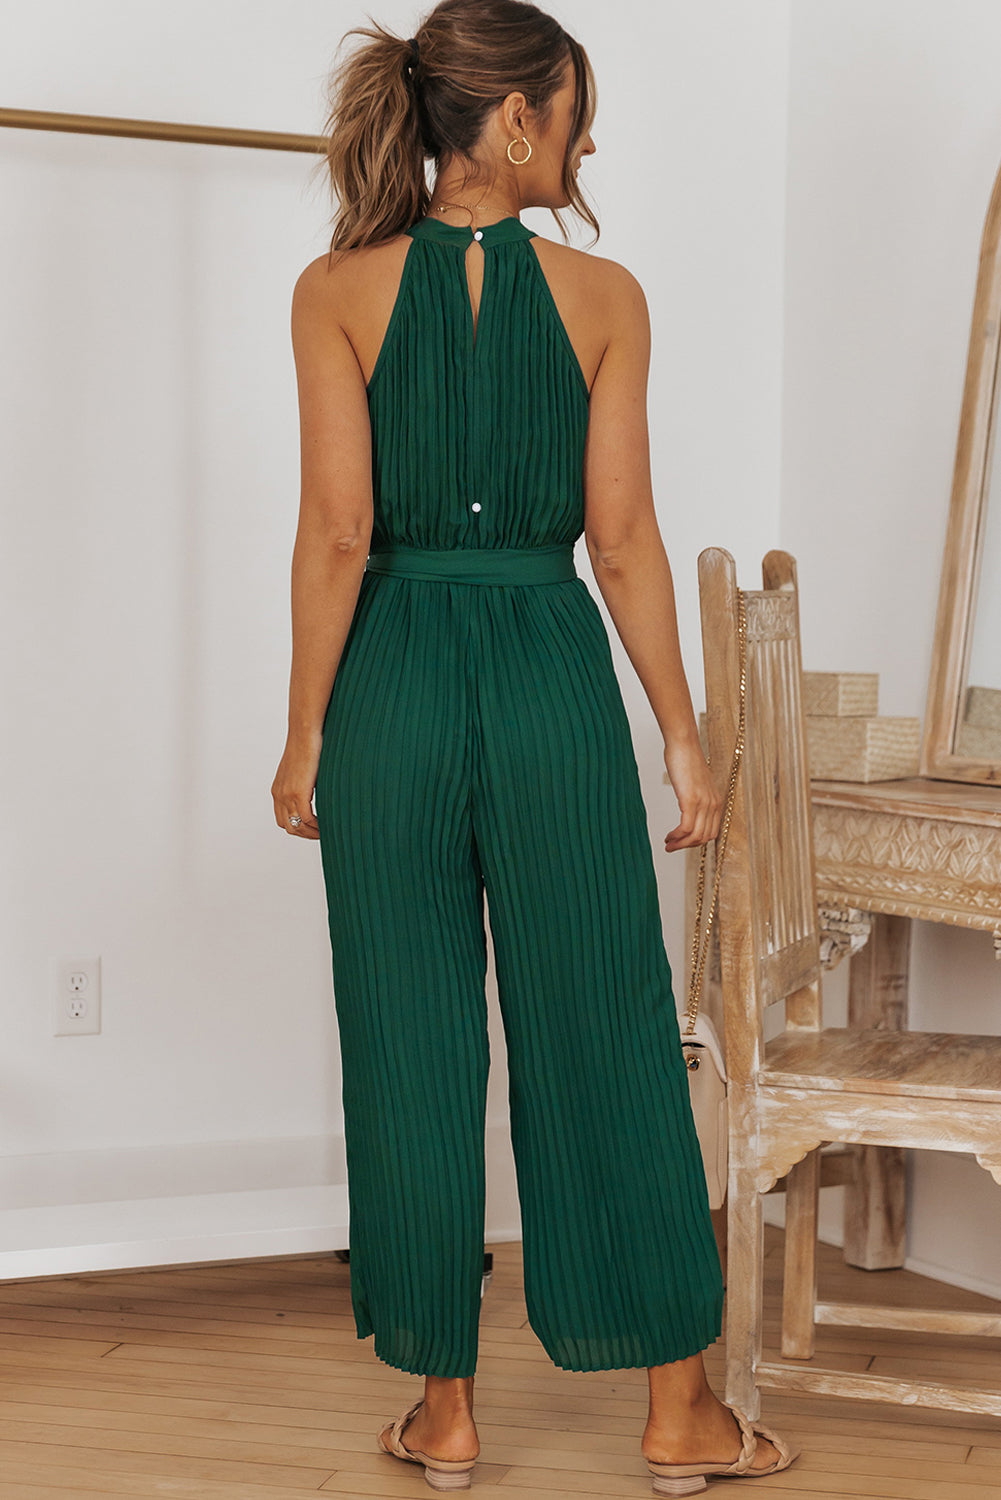 Accordion Pleated Belted Grecian Neck Sleeveless Jumpsuit - Girl Code